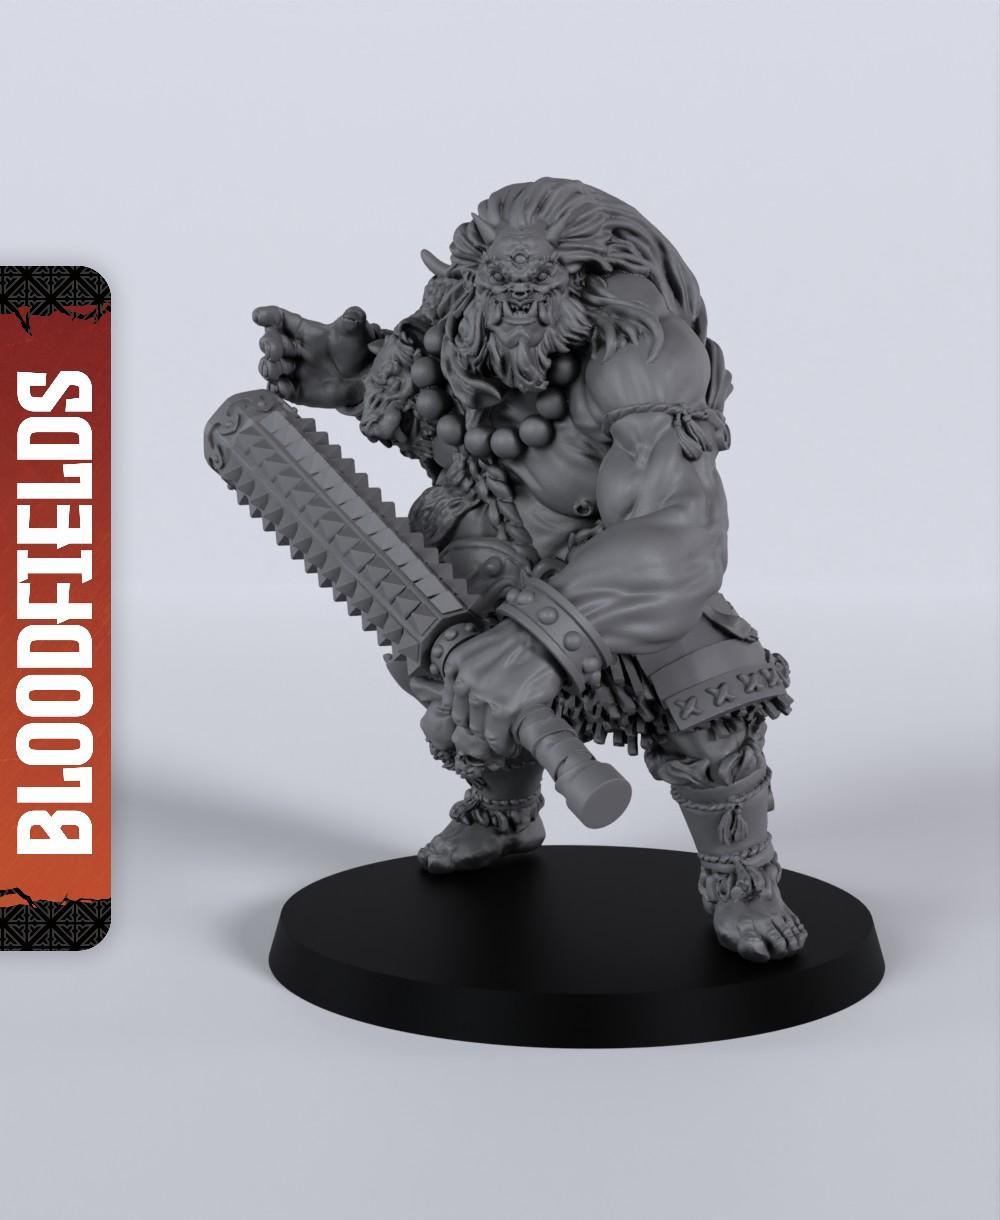 Oni - With Free Dragon Warhammer - 5e DnD Inspired for RPG and Wargamers 3d model